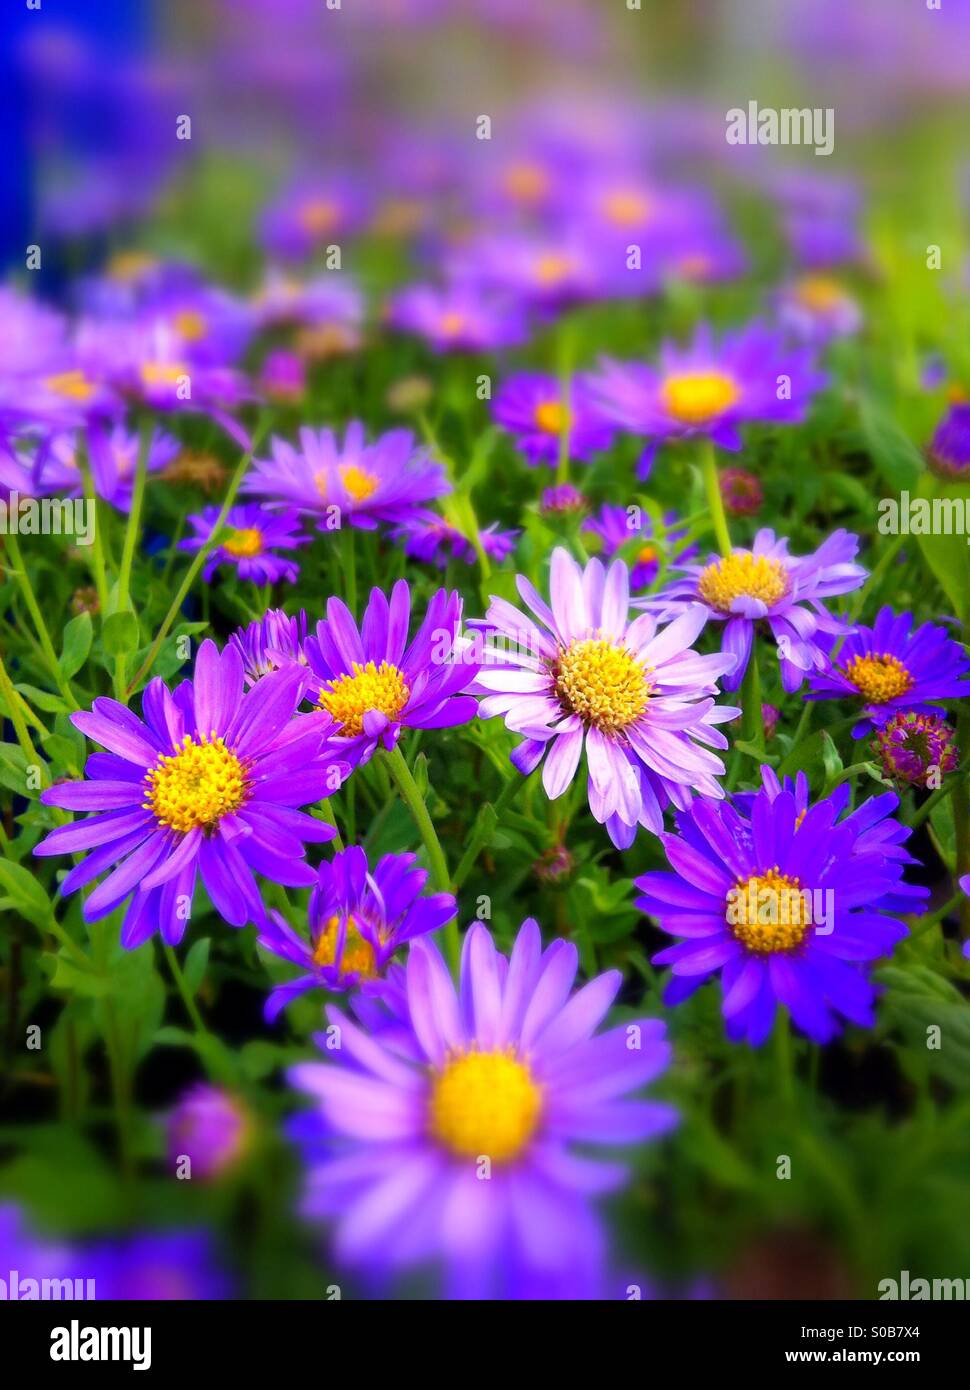 Violet purple aster flowers Stock Photo